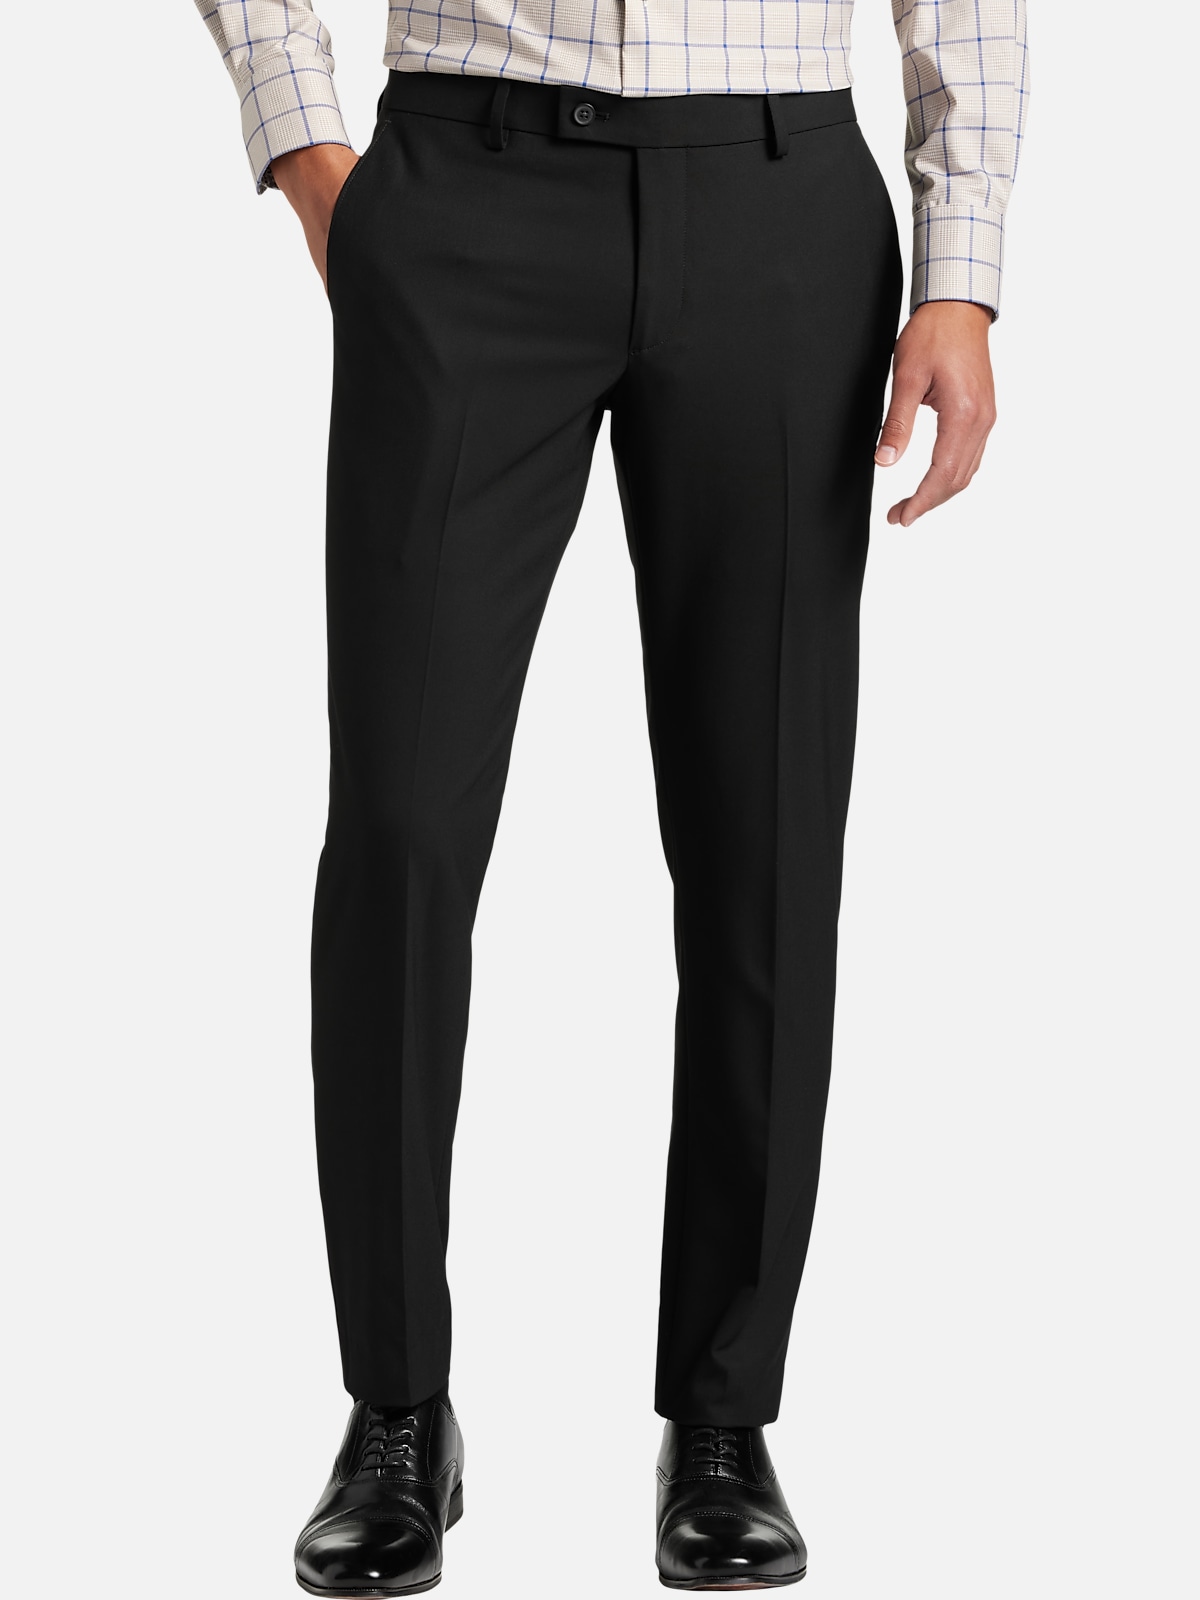 Egara Skinny Fit Suit Separates Pants | All Clearance| Men's Wearhouse